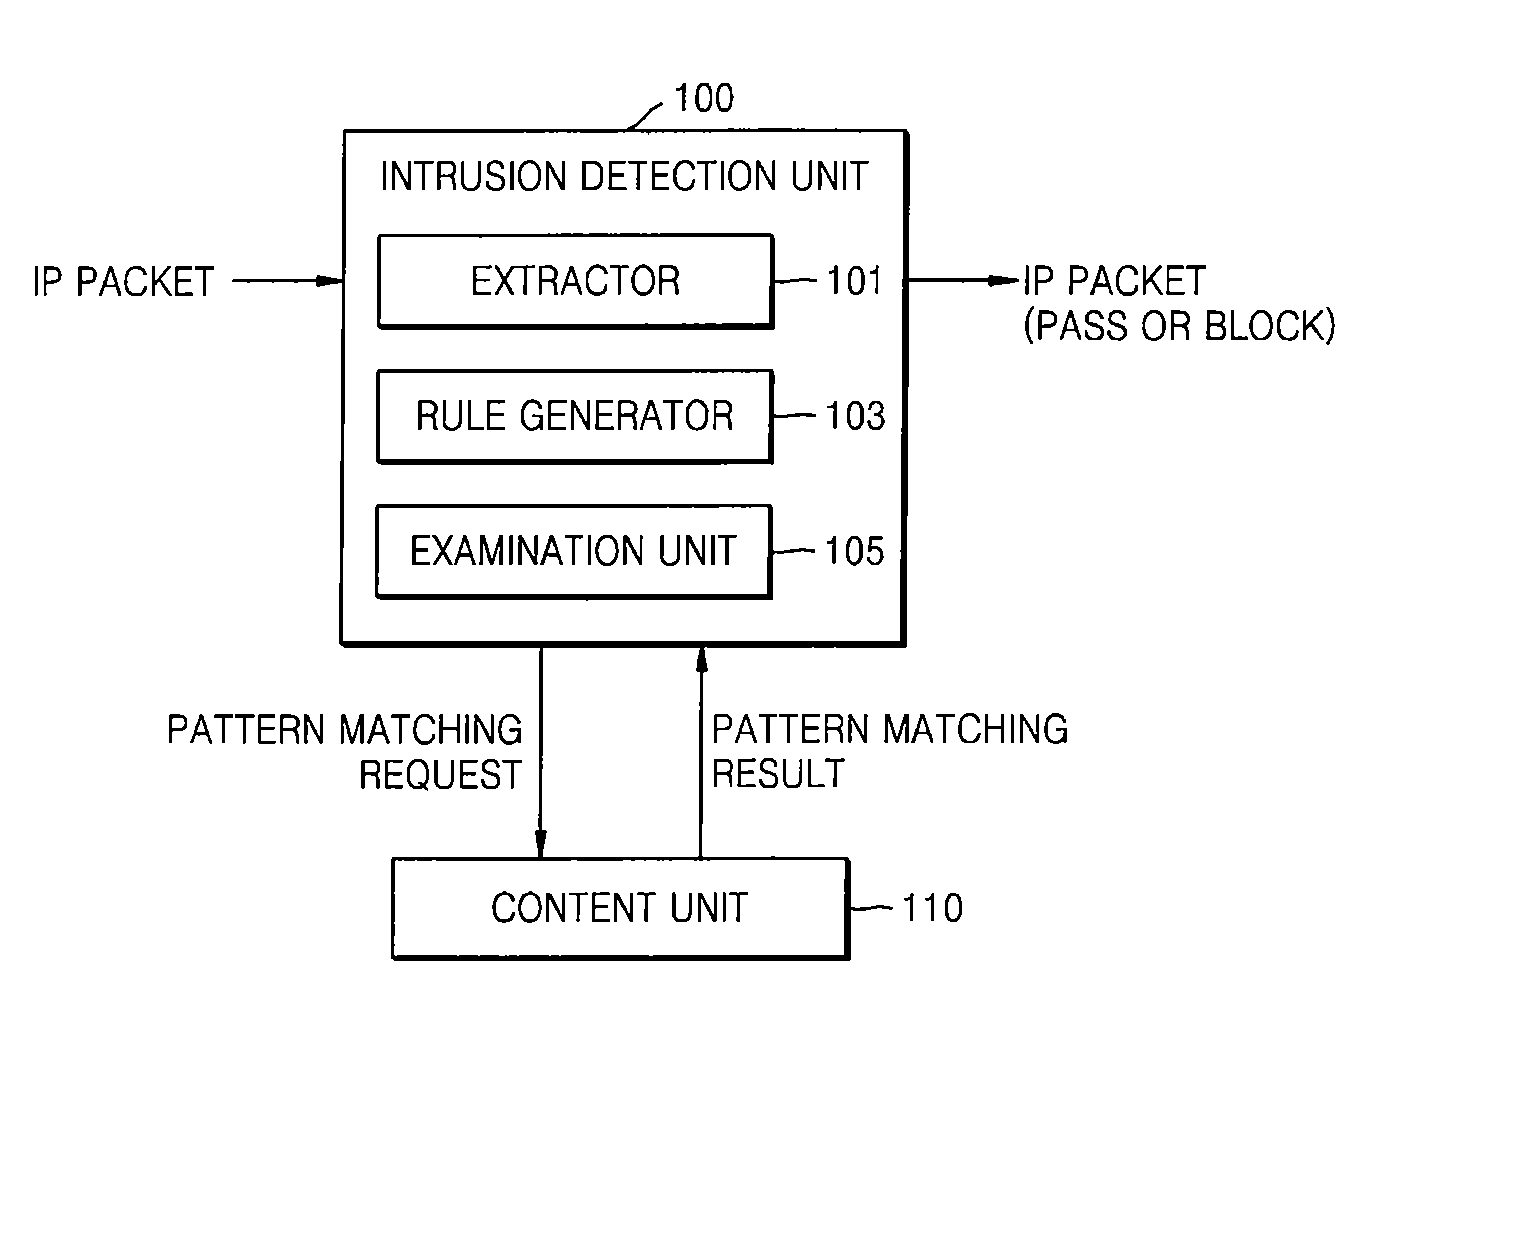 Intrusion detection apparatus and method using patterns